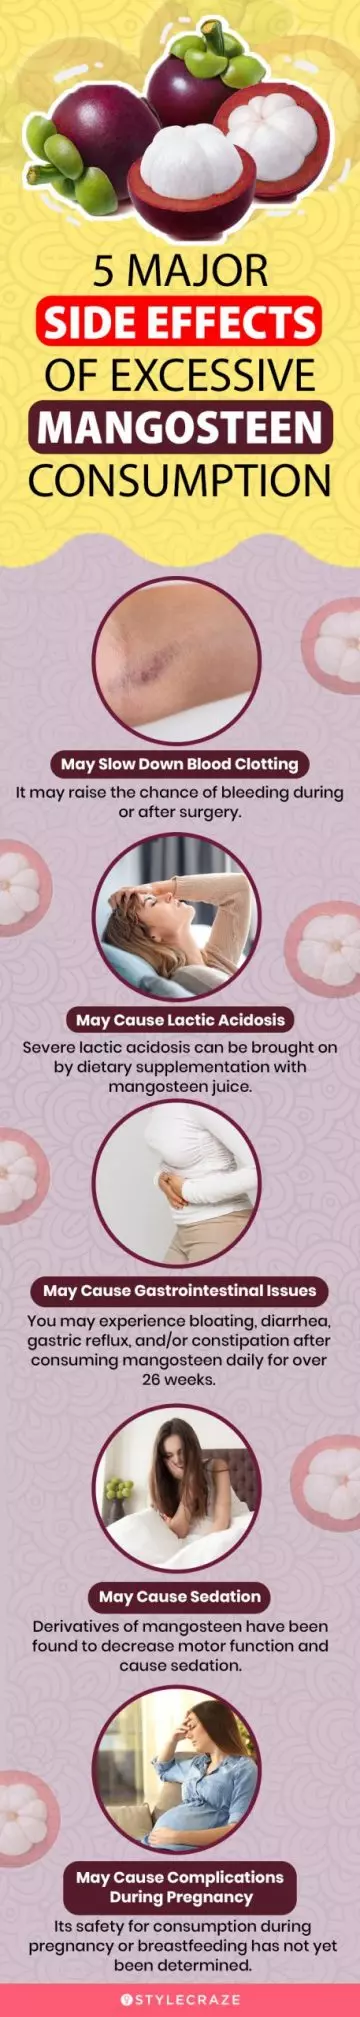 5 major side effects of excessive mangosteen consumption (infographic)